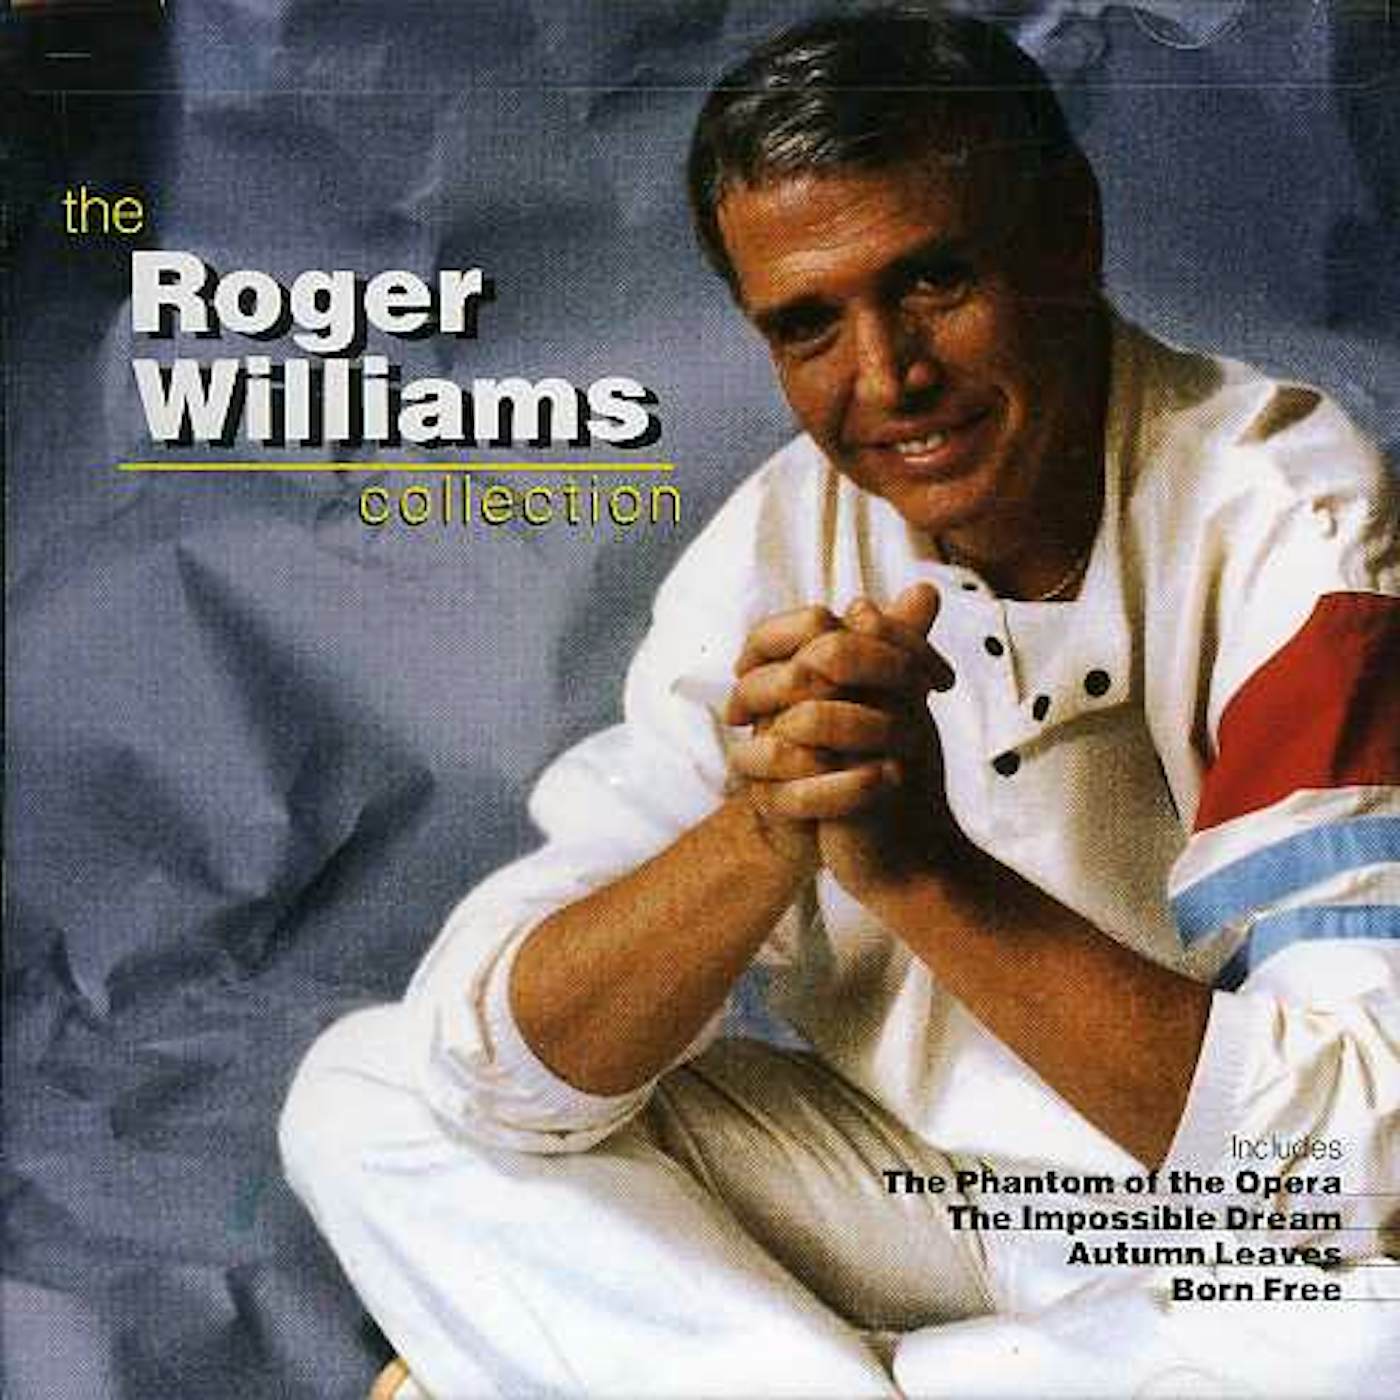 Roger Williams COLLECTION CD